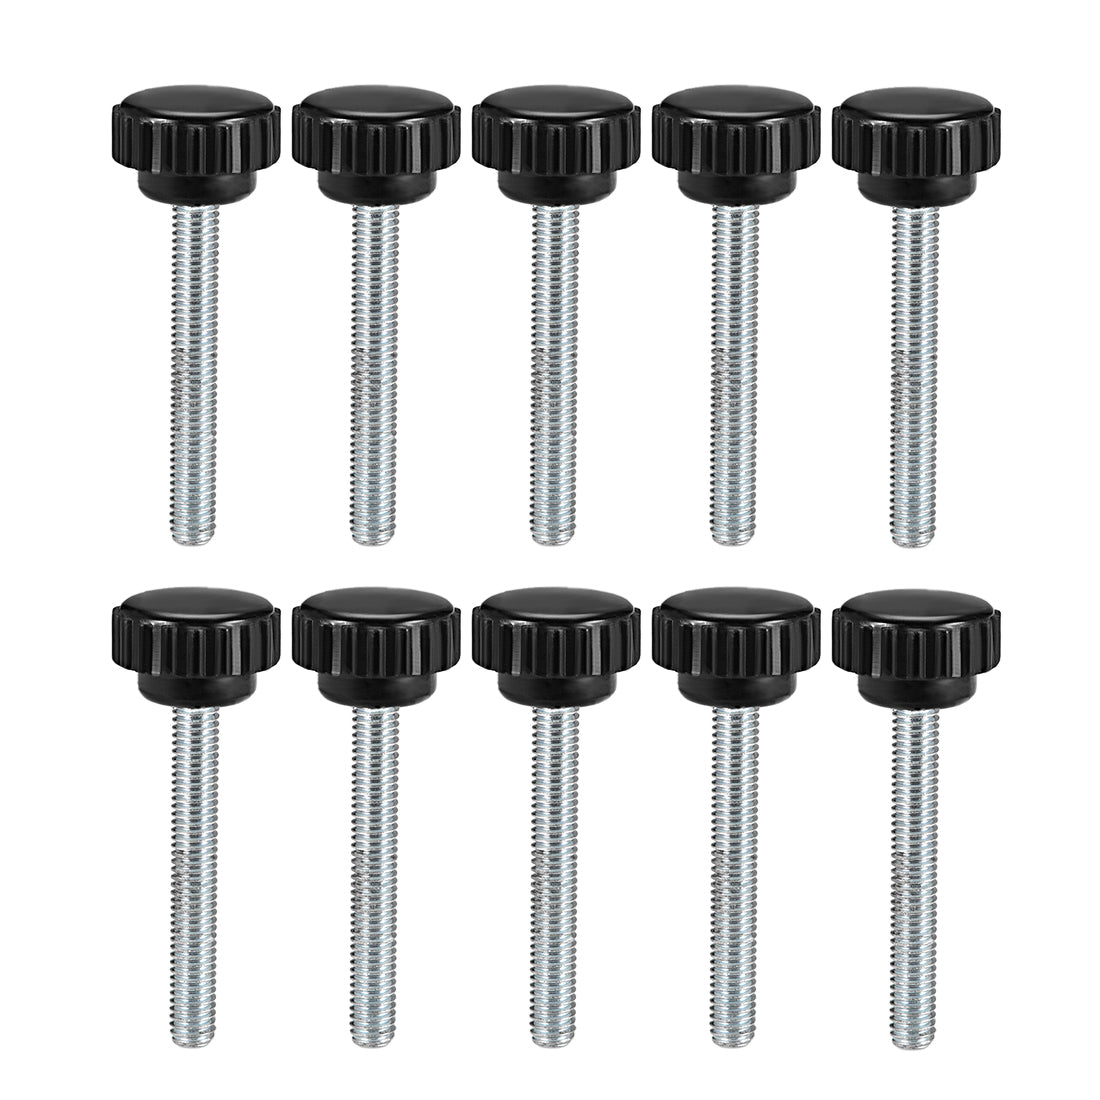 Uxcell Uxcell M6 x 30mm Male Thread Knurled Clamping Knobs Grip Thumb Screw on Type 10 Pcs